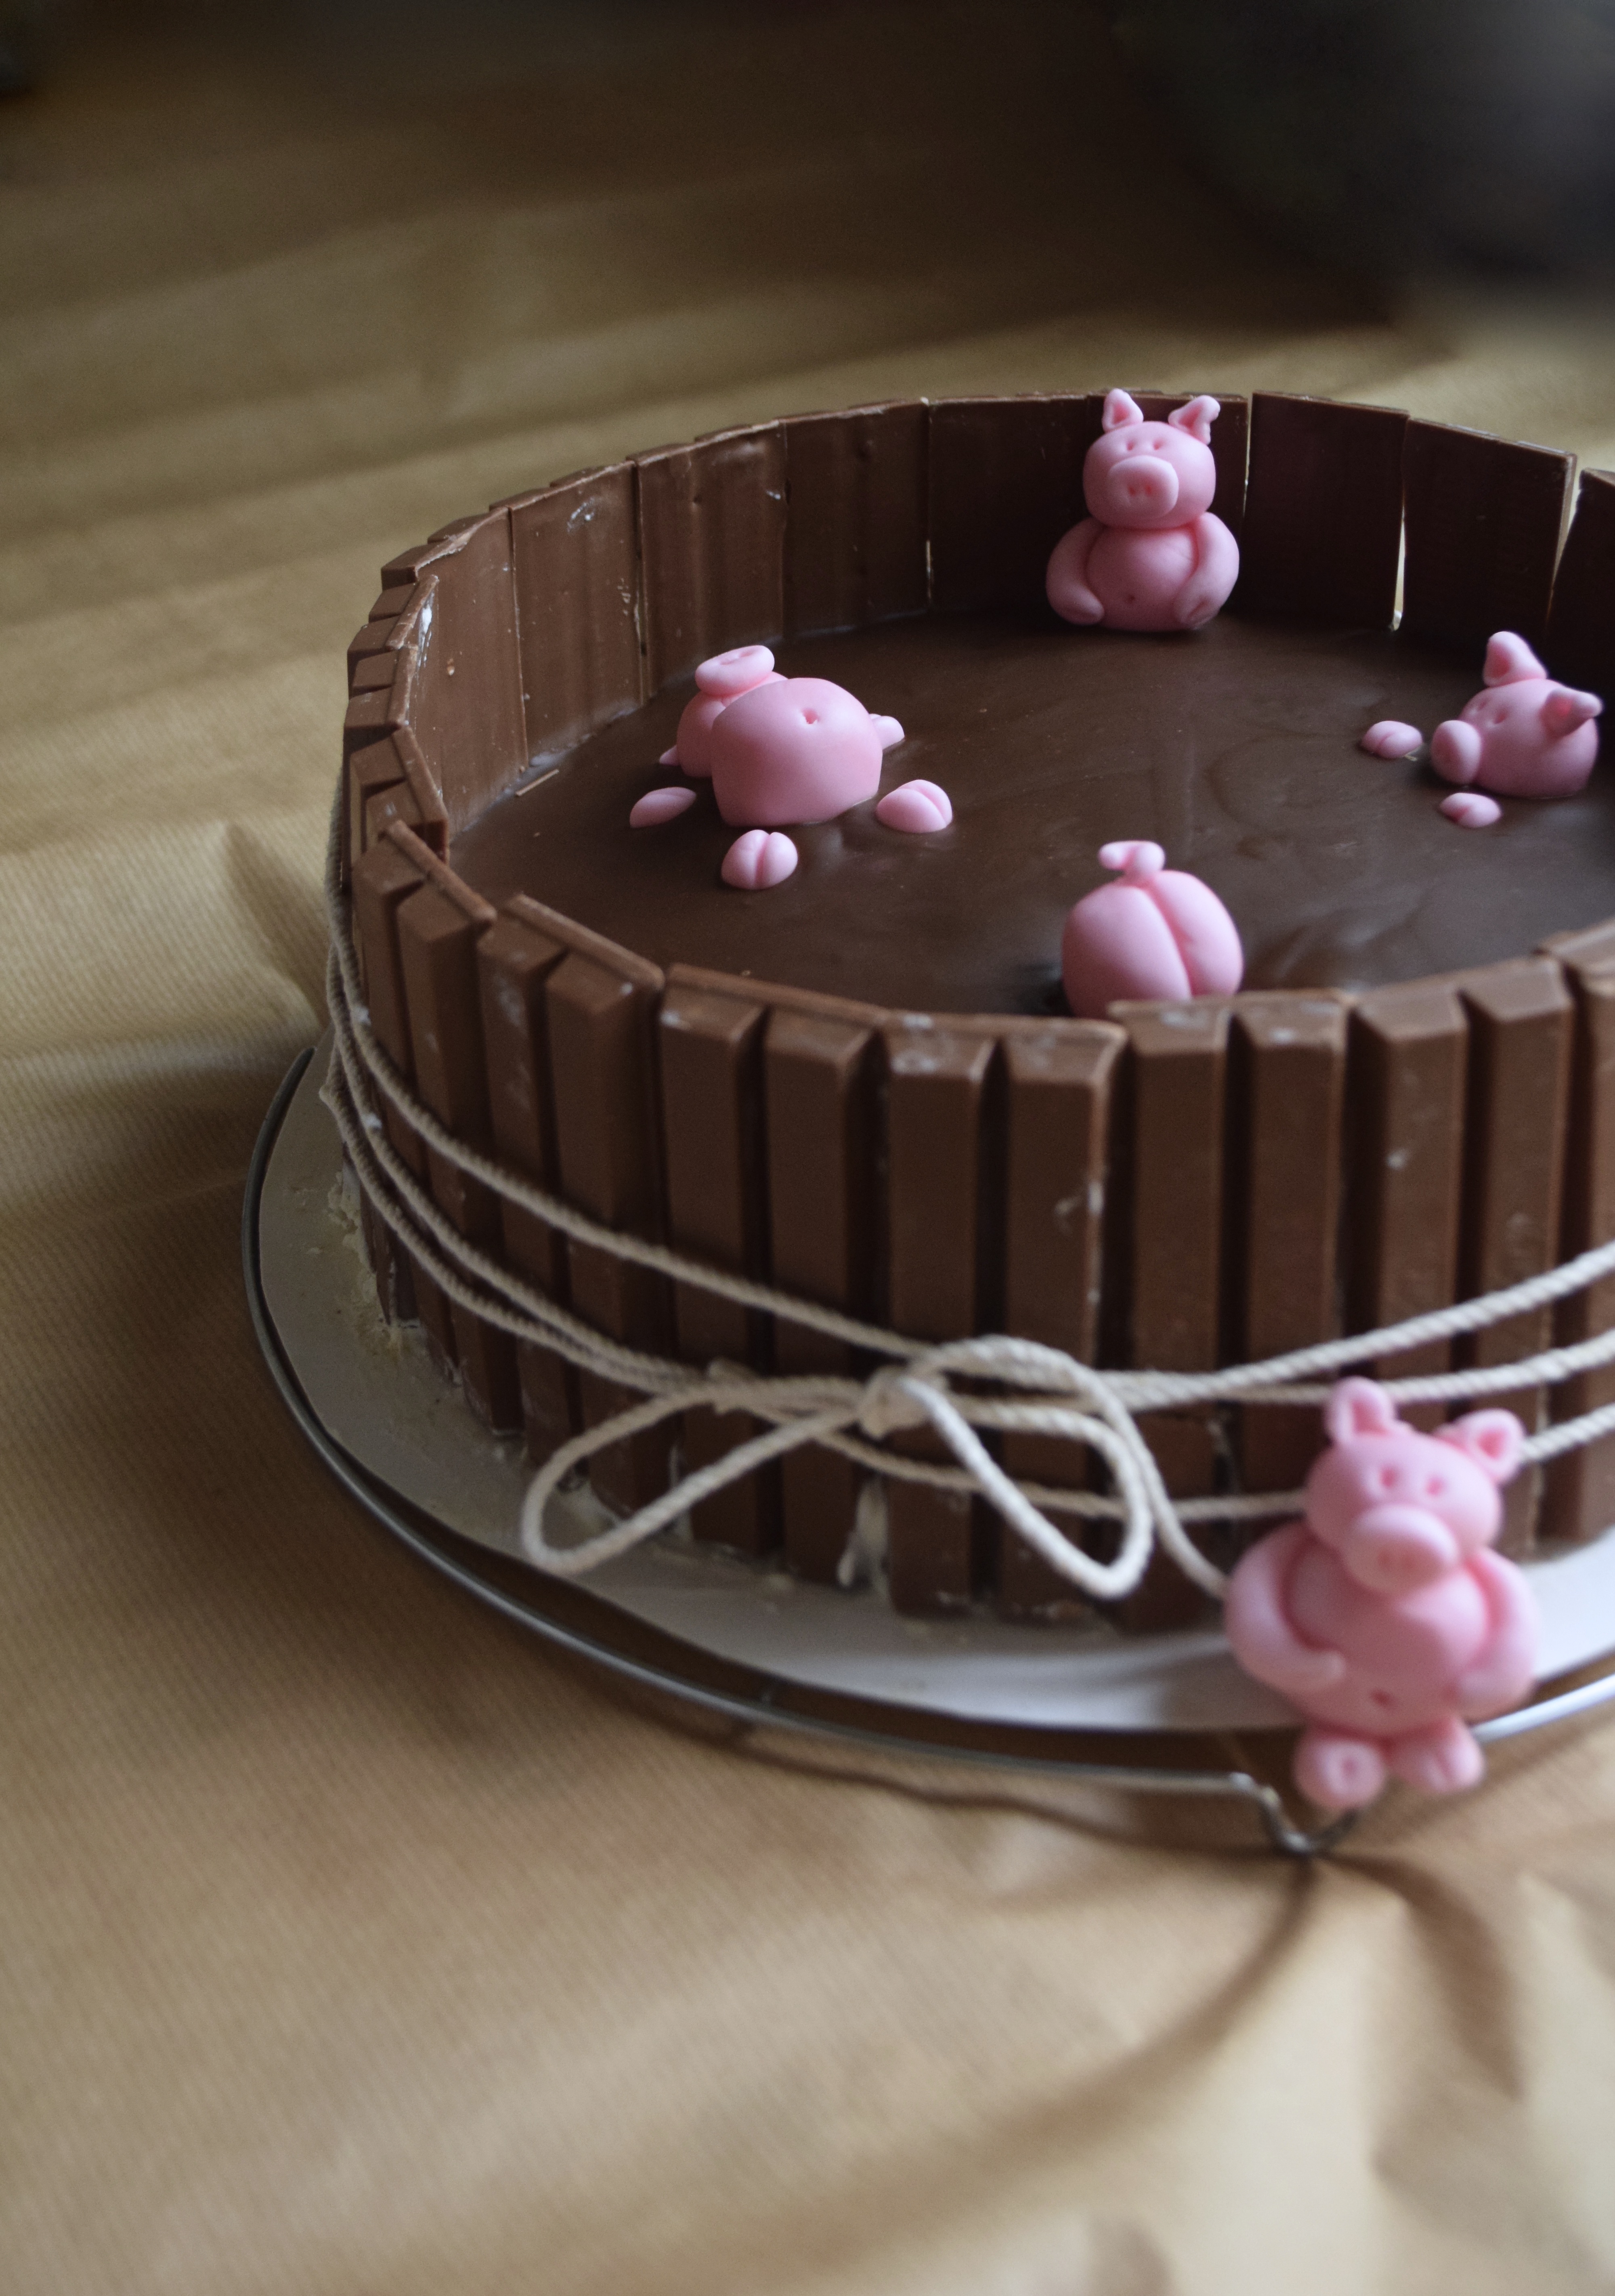 "Pigs in the mud" cake